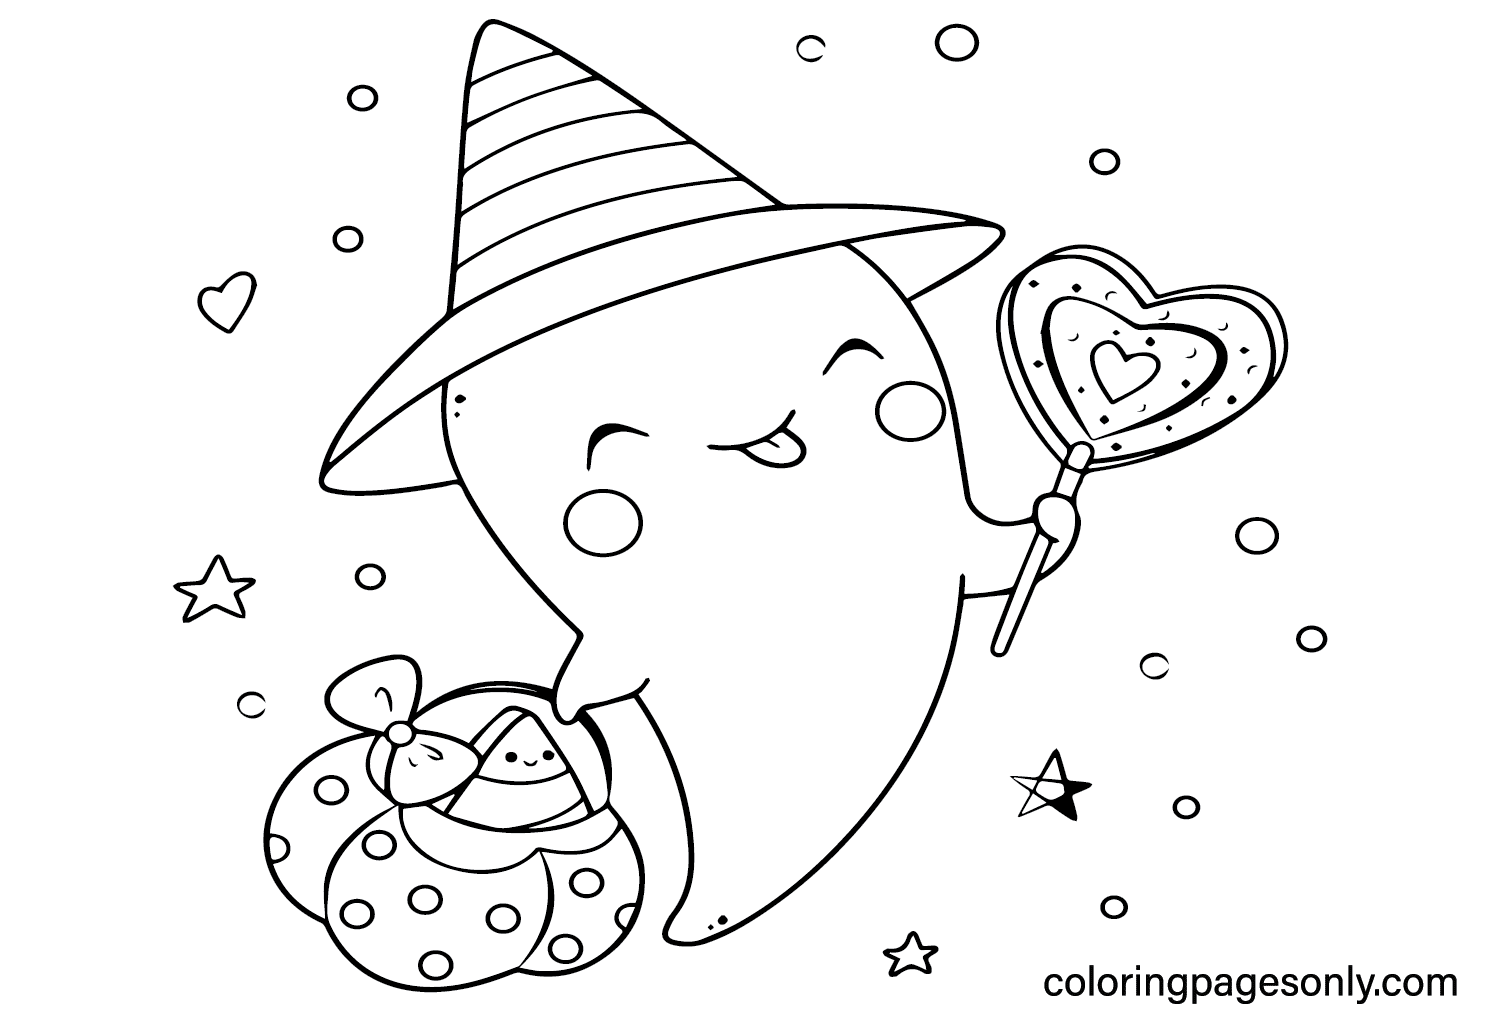 Easy Cute Halloween Coloring Page